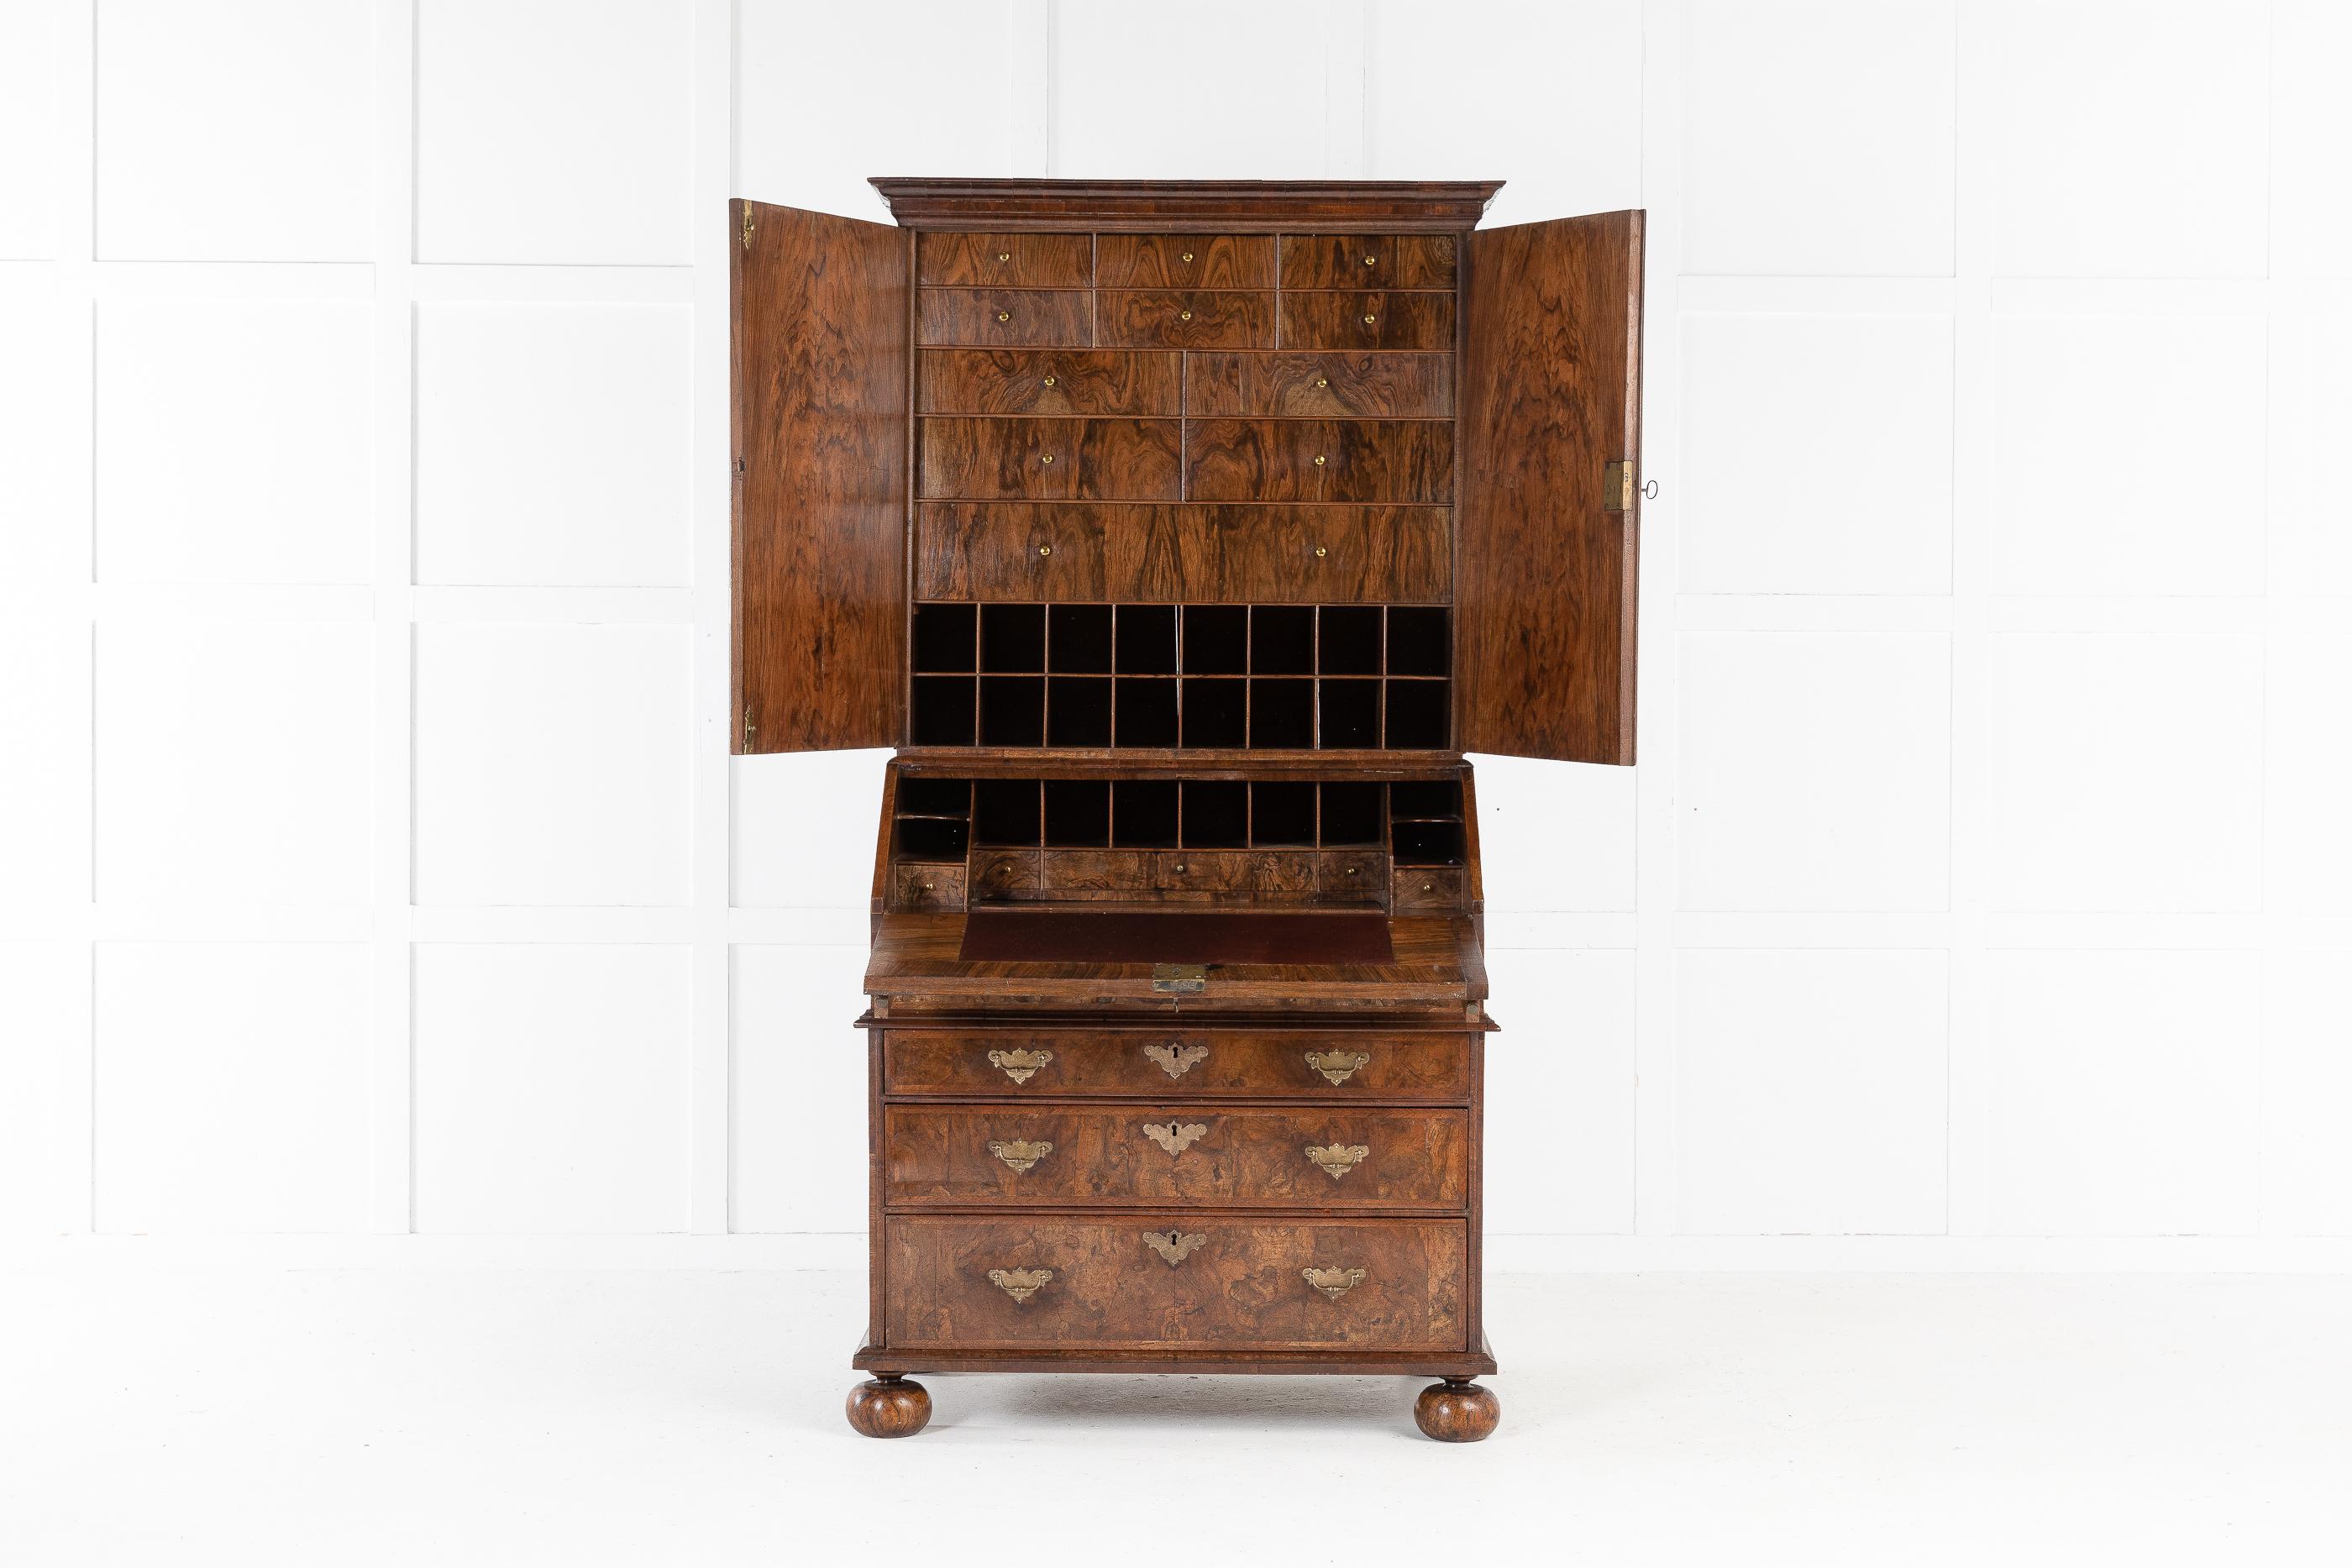 Rare, small proportioned, 17th century William and Mary period, highly figured, walnut bureau cabinet, retaining a wonderful color and patination. The top section has quarter veneered doors using quality veneer. The feather and cross banded doors